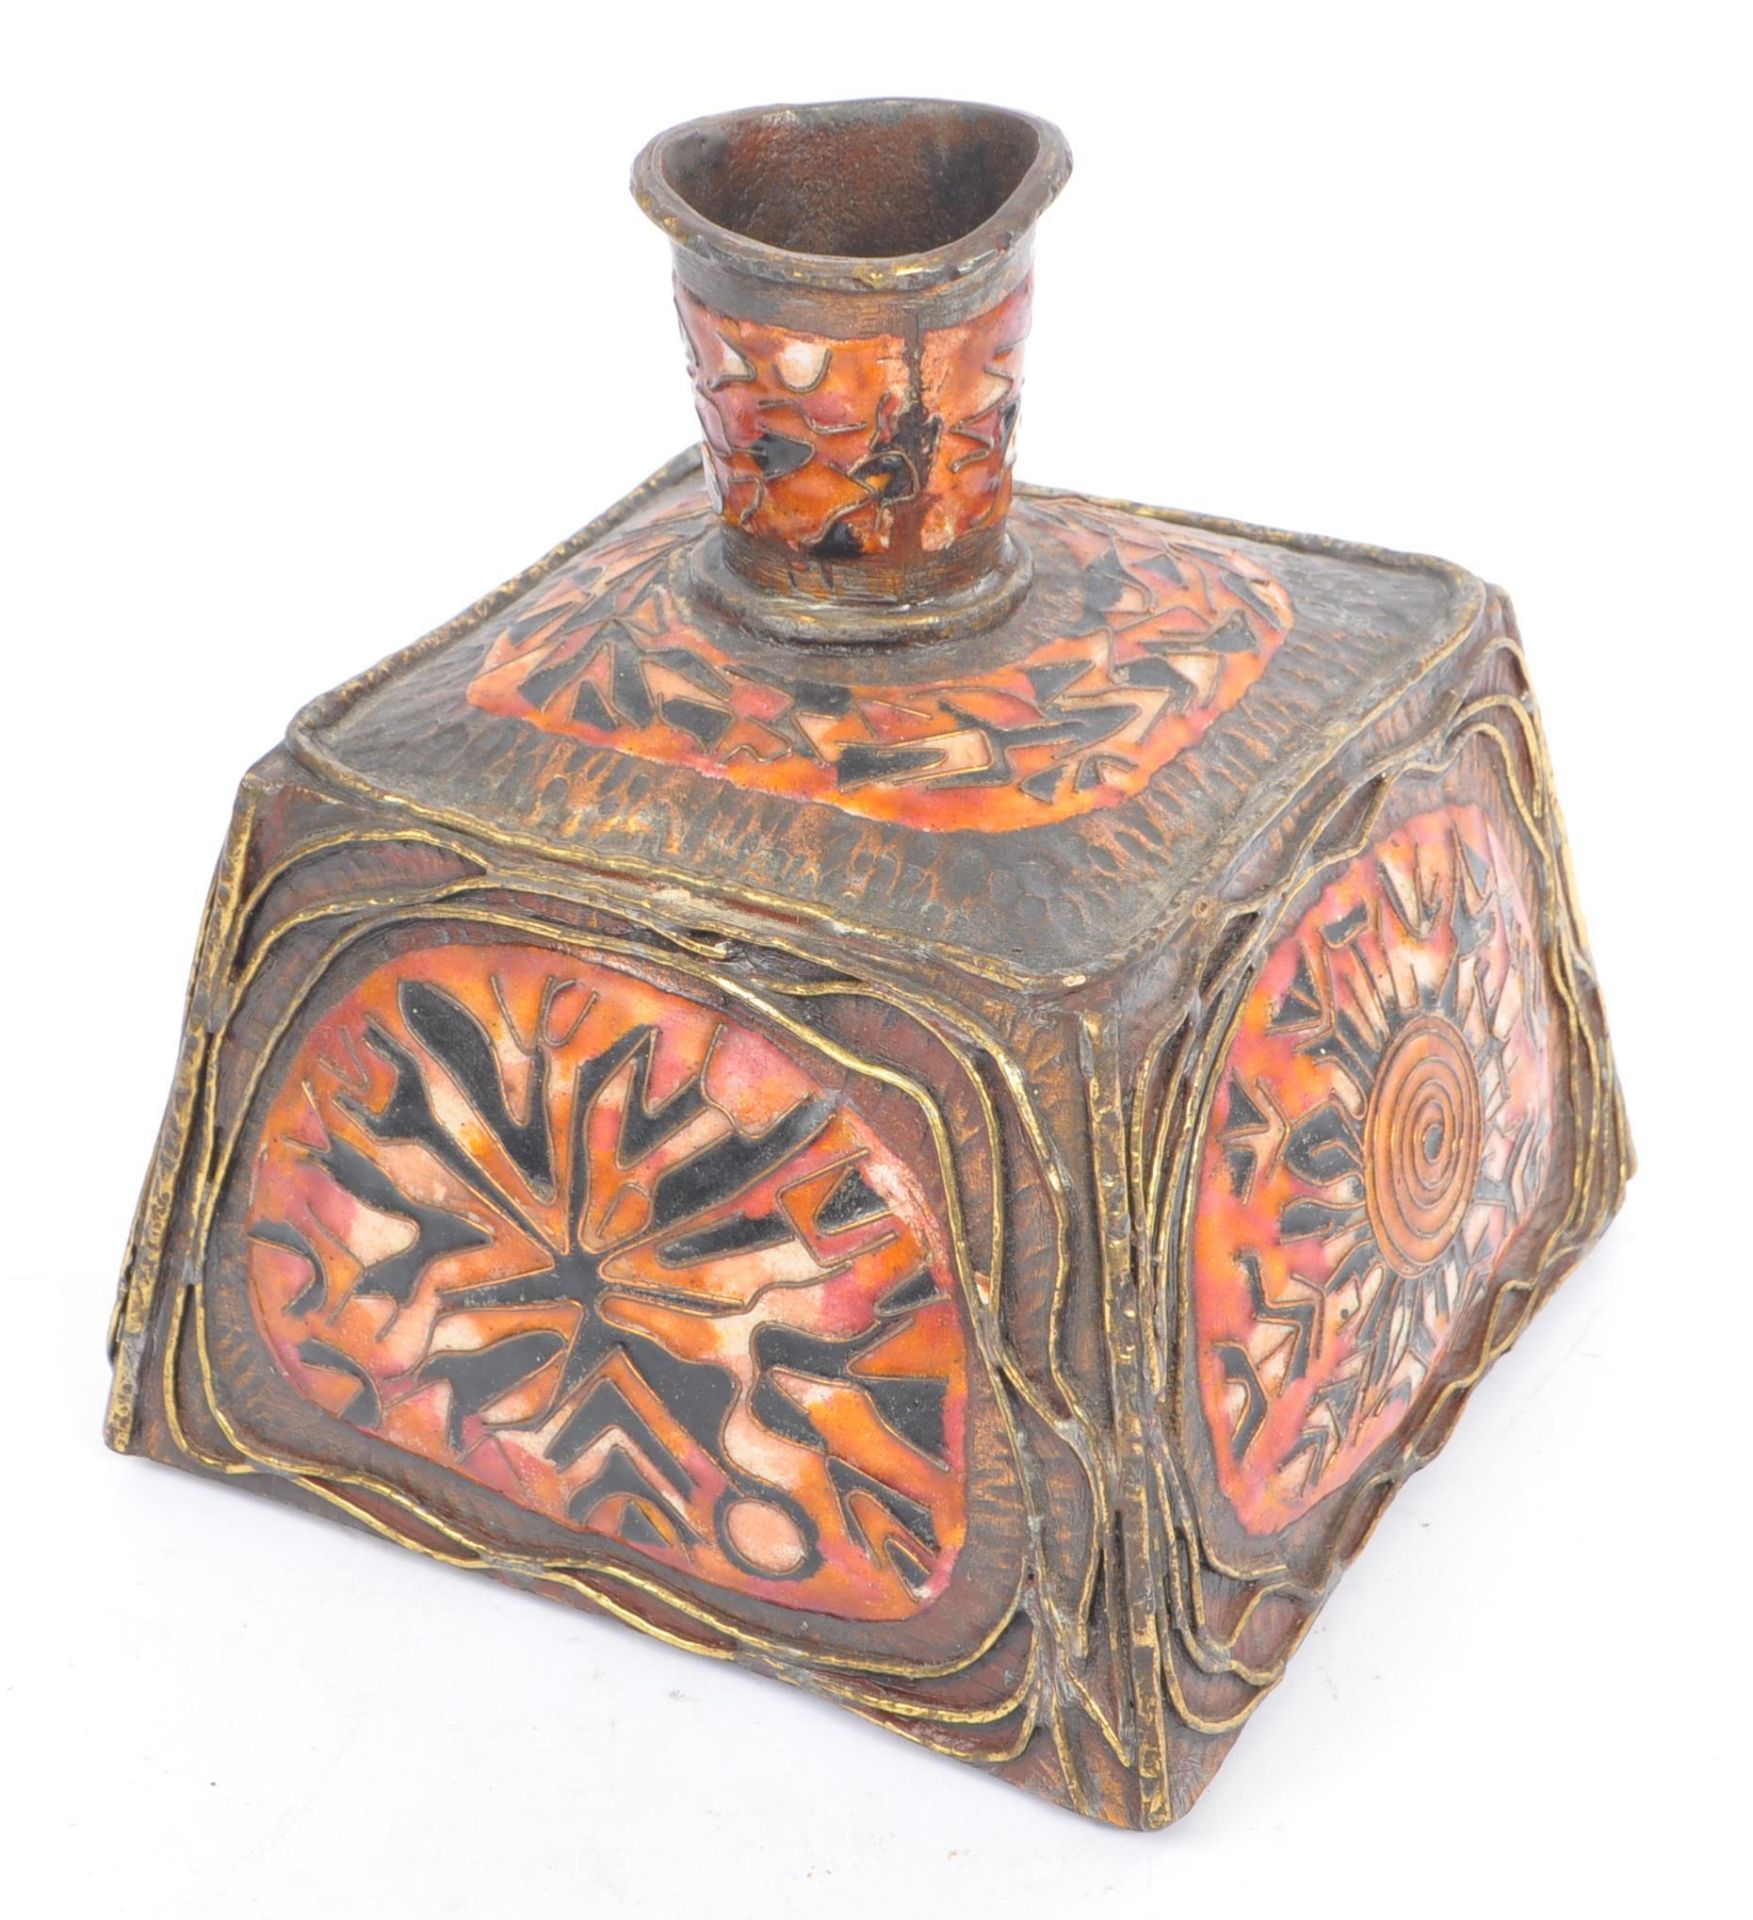 EARLY 20TH CENTURY MIDDLE EASTERN ENAMELLED BRASS VASE - Image 4 of 6